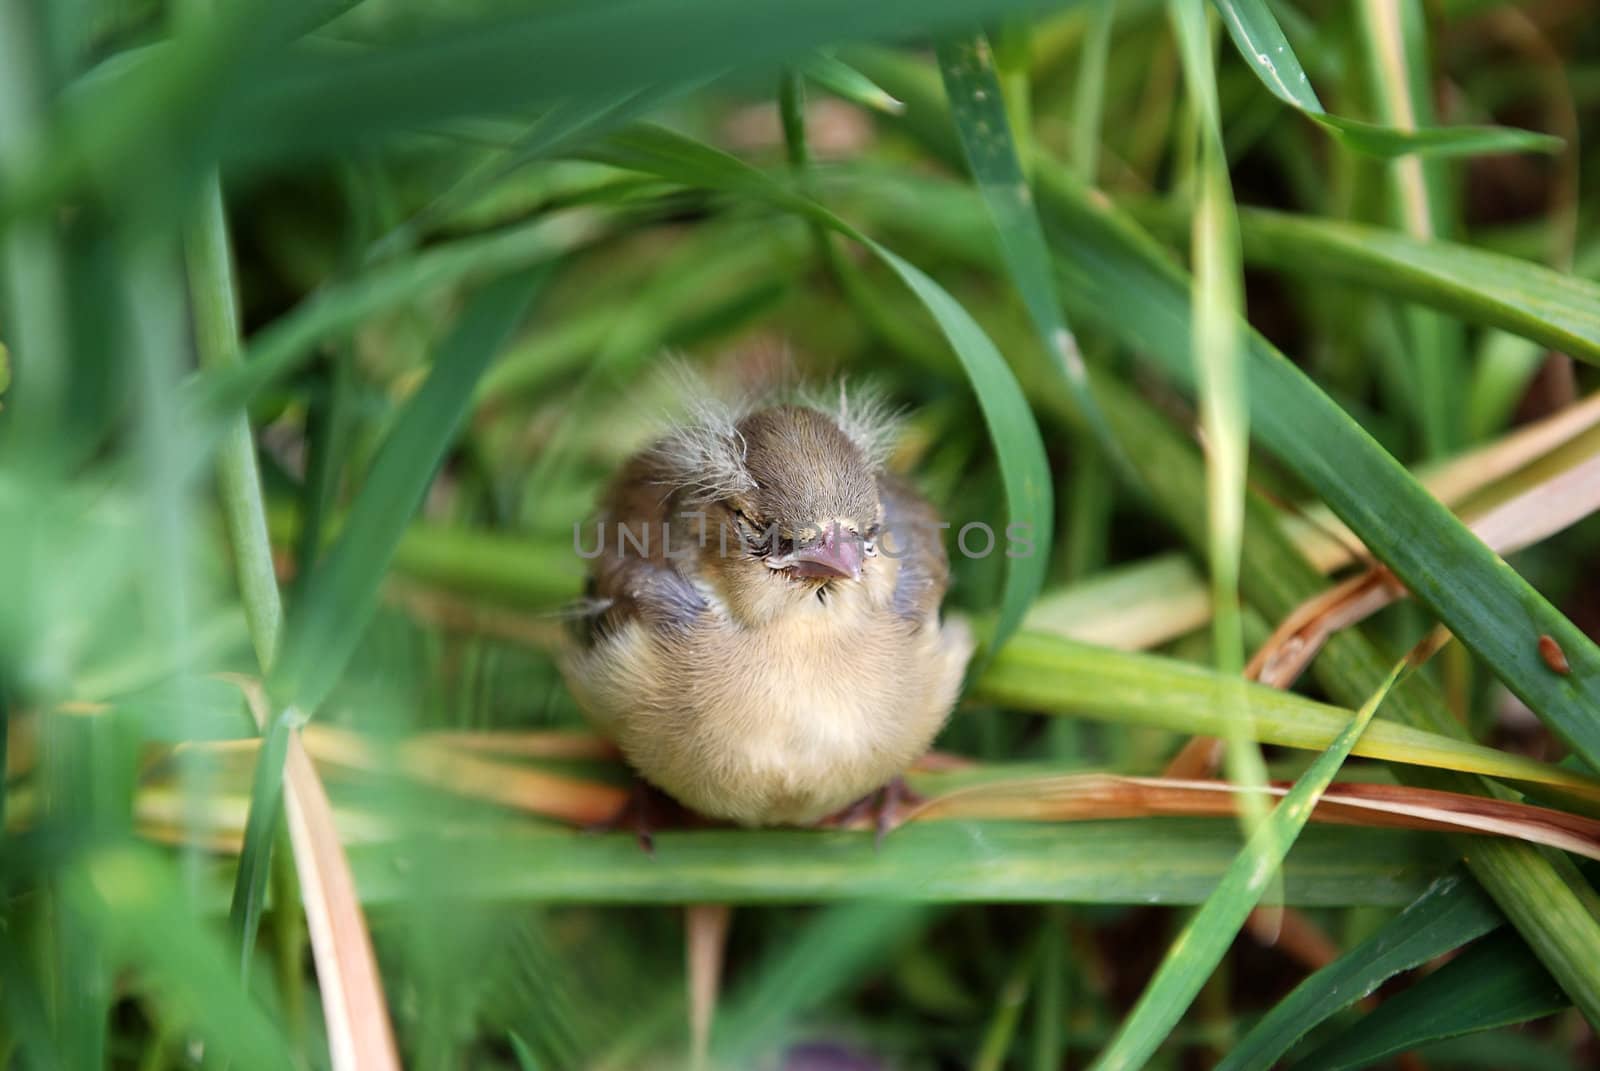 Fledgling chaffinch sitting with its eyes closed in tall grass